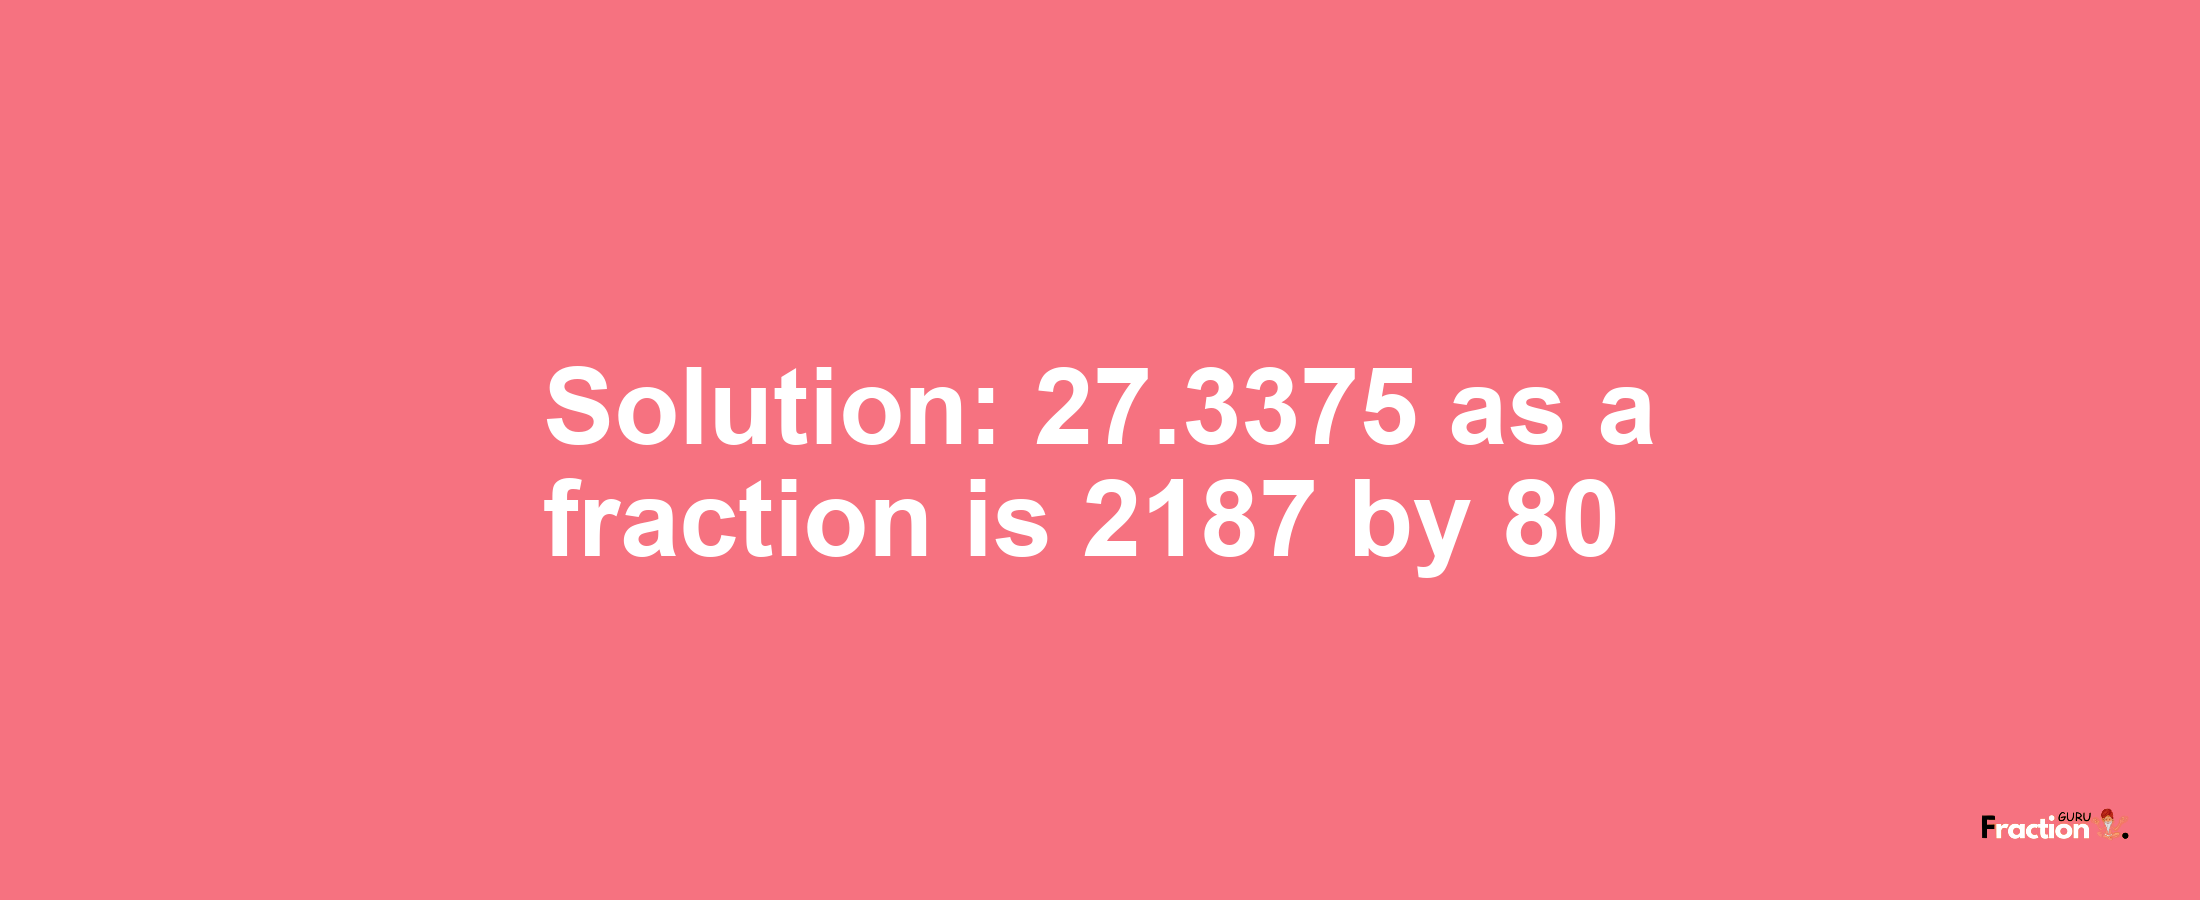 Solution:27.3375 as a fraction is 2187/80